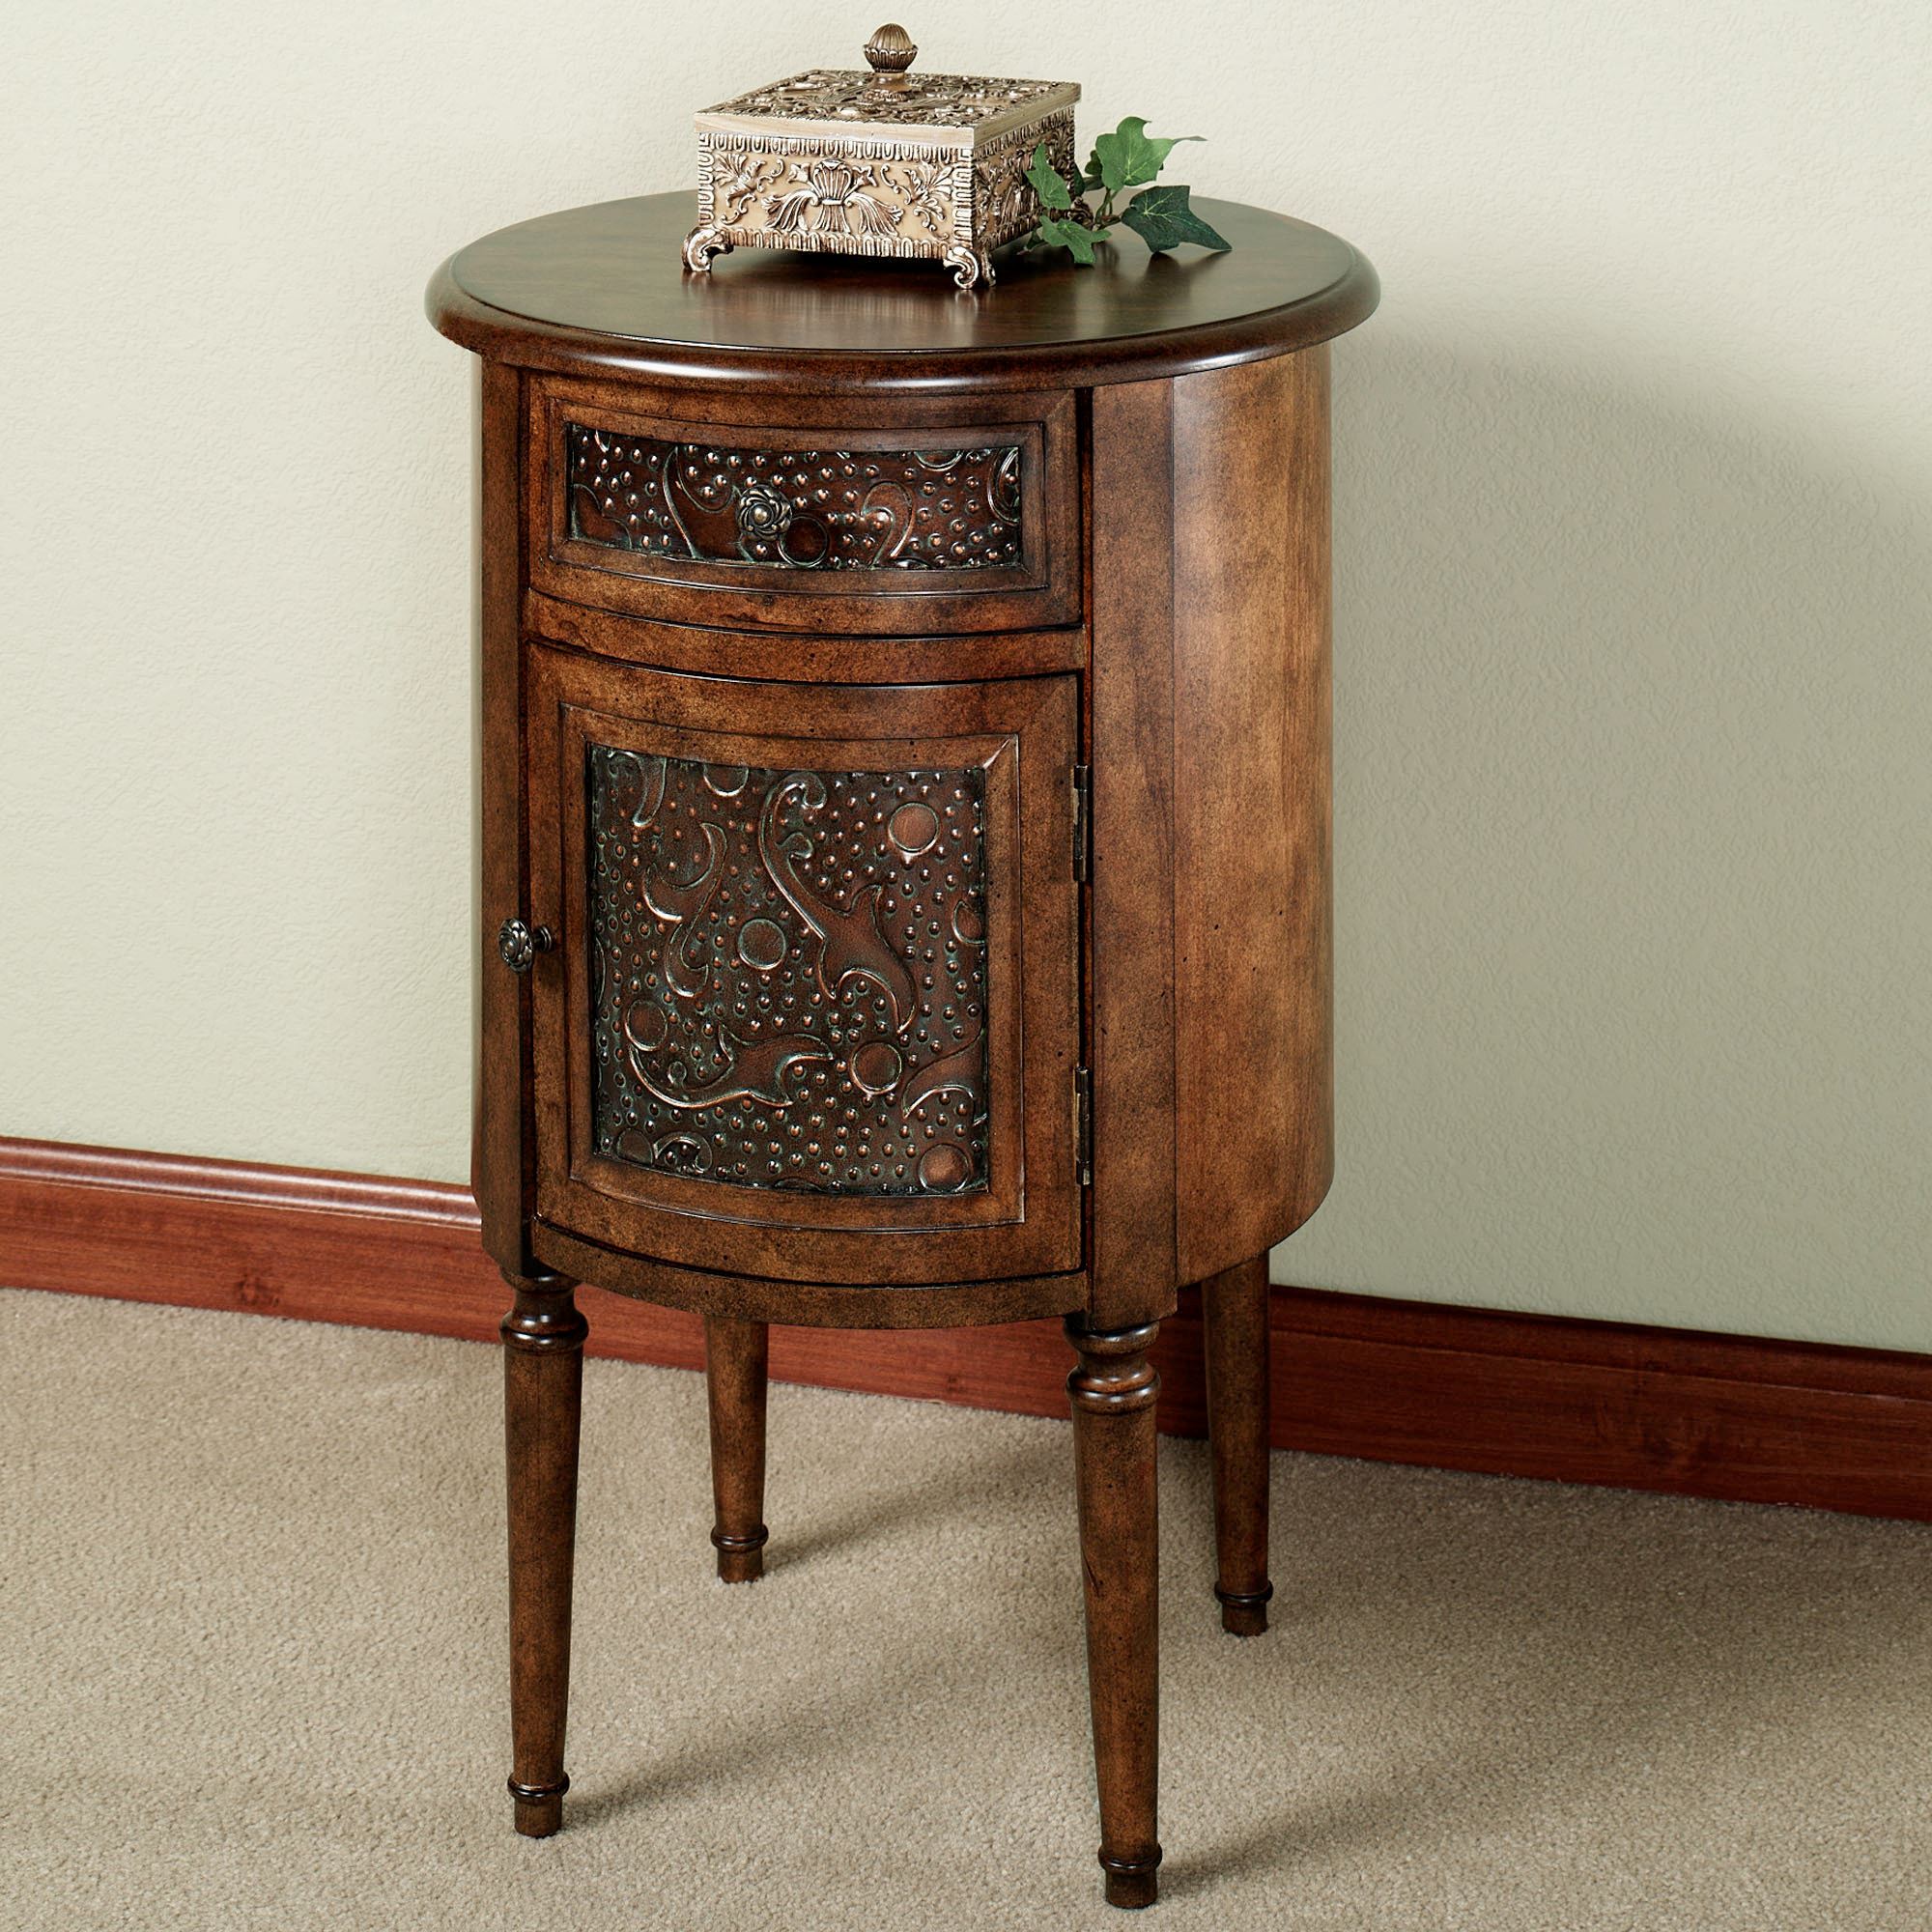 lombardy round storage accent table cherry corner english walnut touch zoom innovative coffee modern furniture miami crystal side lamps oak designer desk club chair nightstand